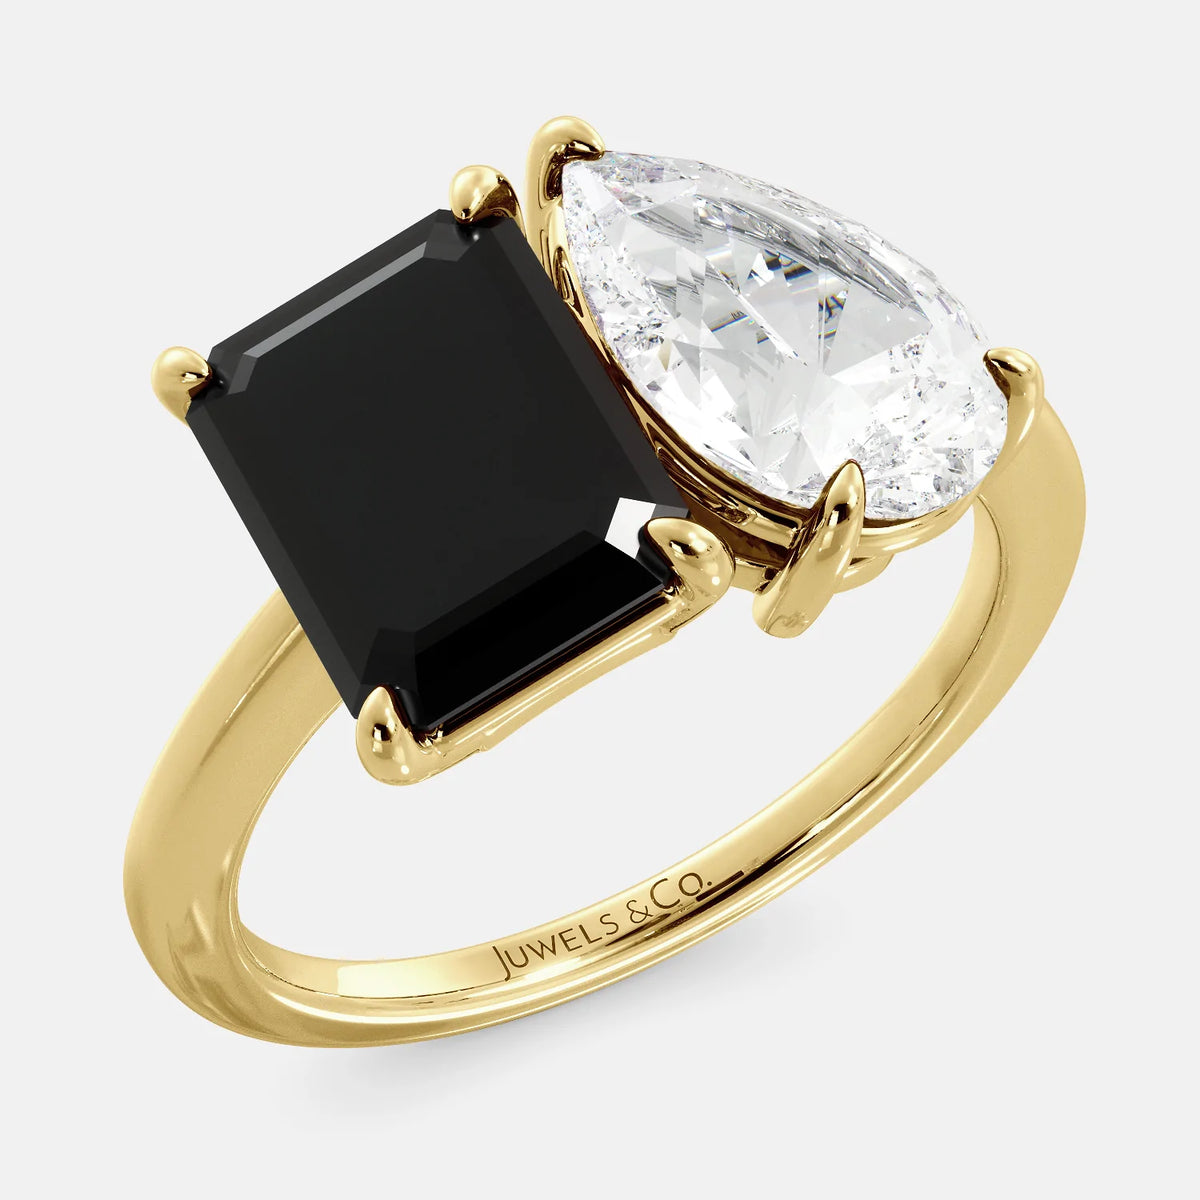 A toi et moi ring with a onyx stone in emerald cut and a pear-shaped stone. The onyx is a deep dark color and the pear-shaped stone can be customized to represent the birth month stone of the wearer or a loved one. The ring is made of 14k gold and is available in all sizes. This ring is a perfect gift for any occasion, and it can be customized to make it truly unique.